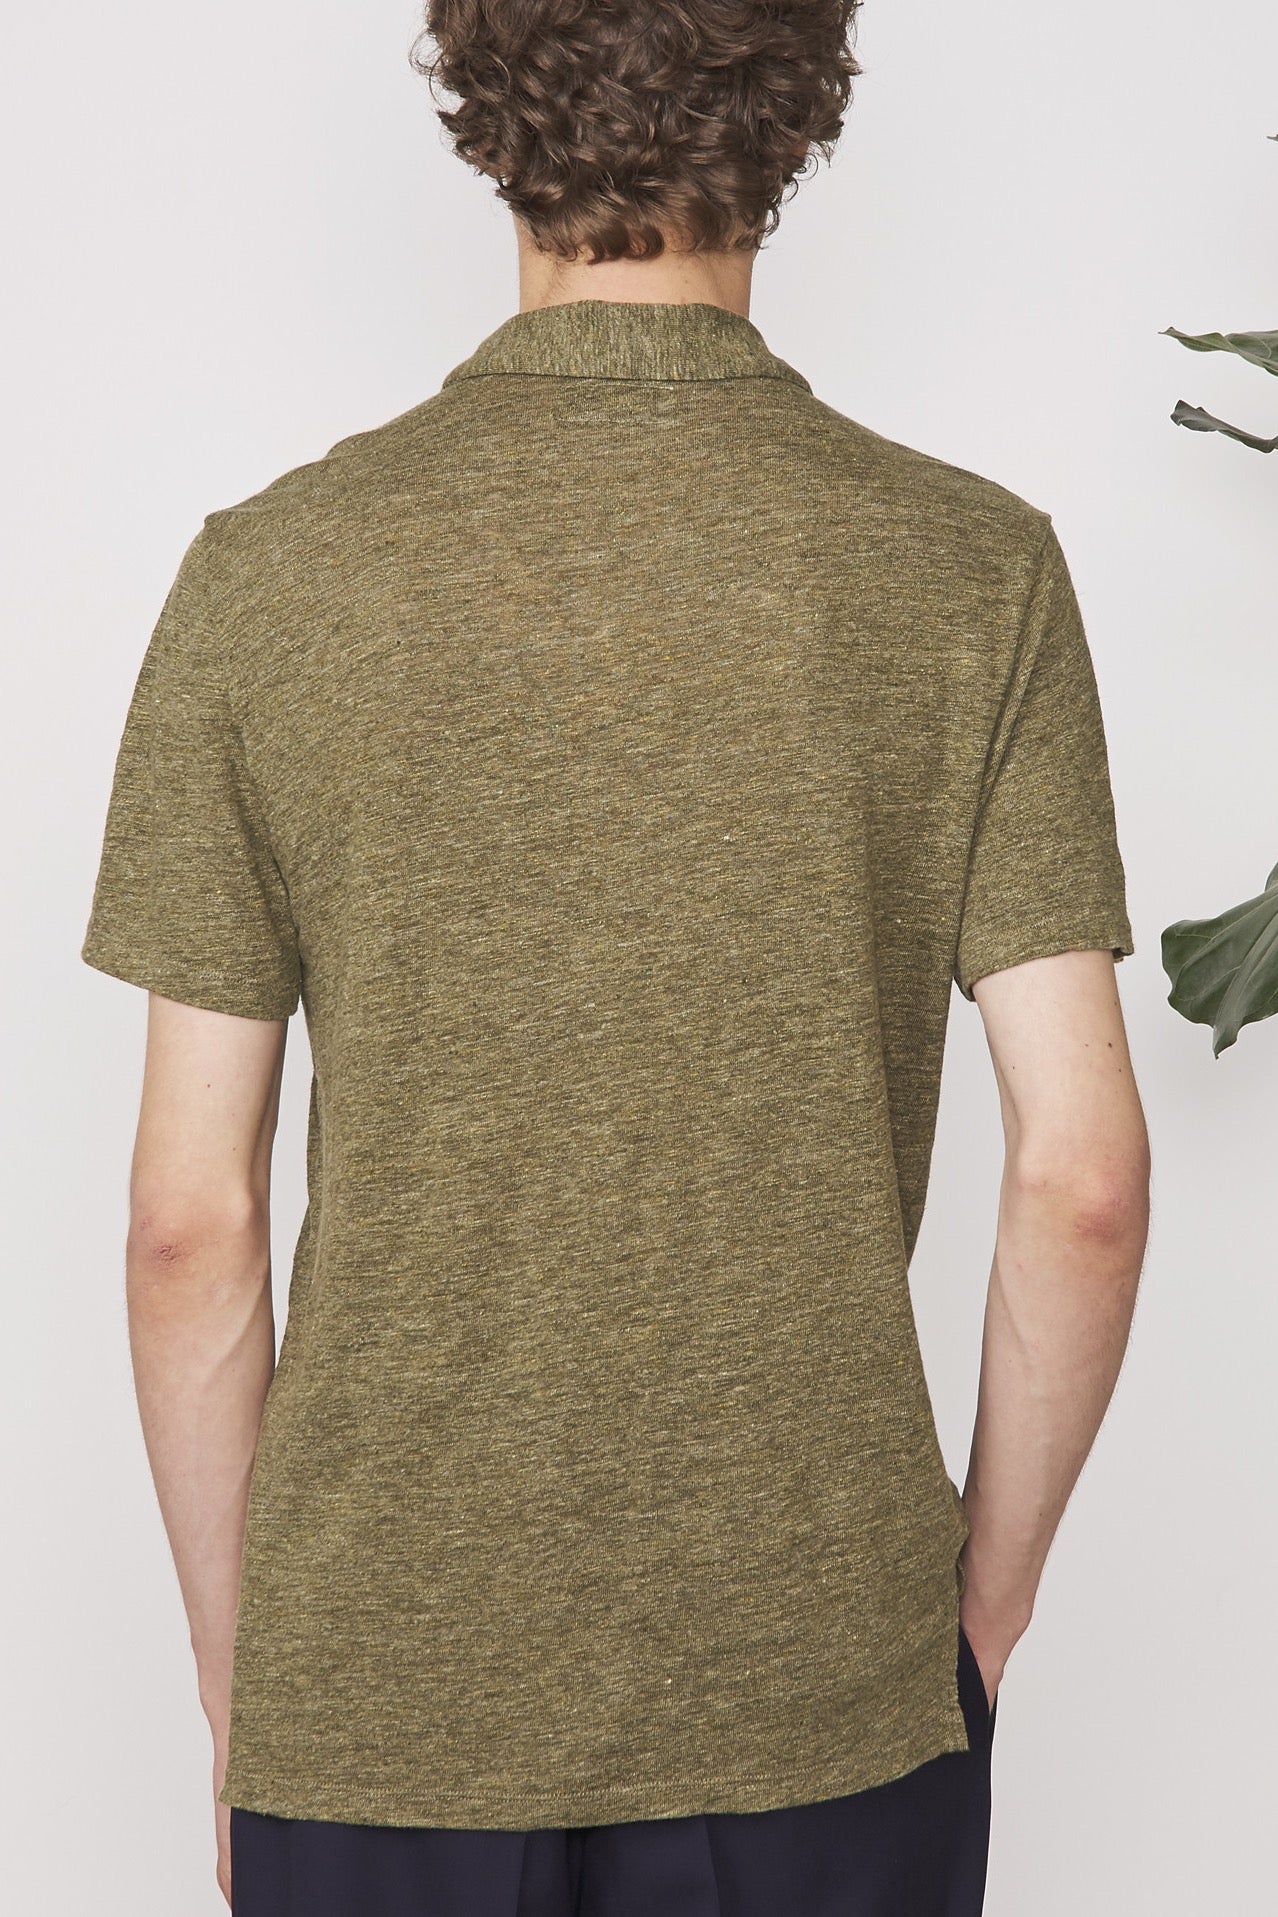 Polo shirt in olive